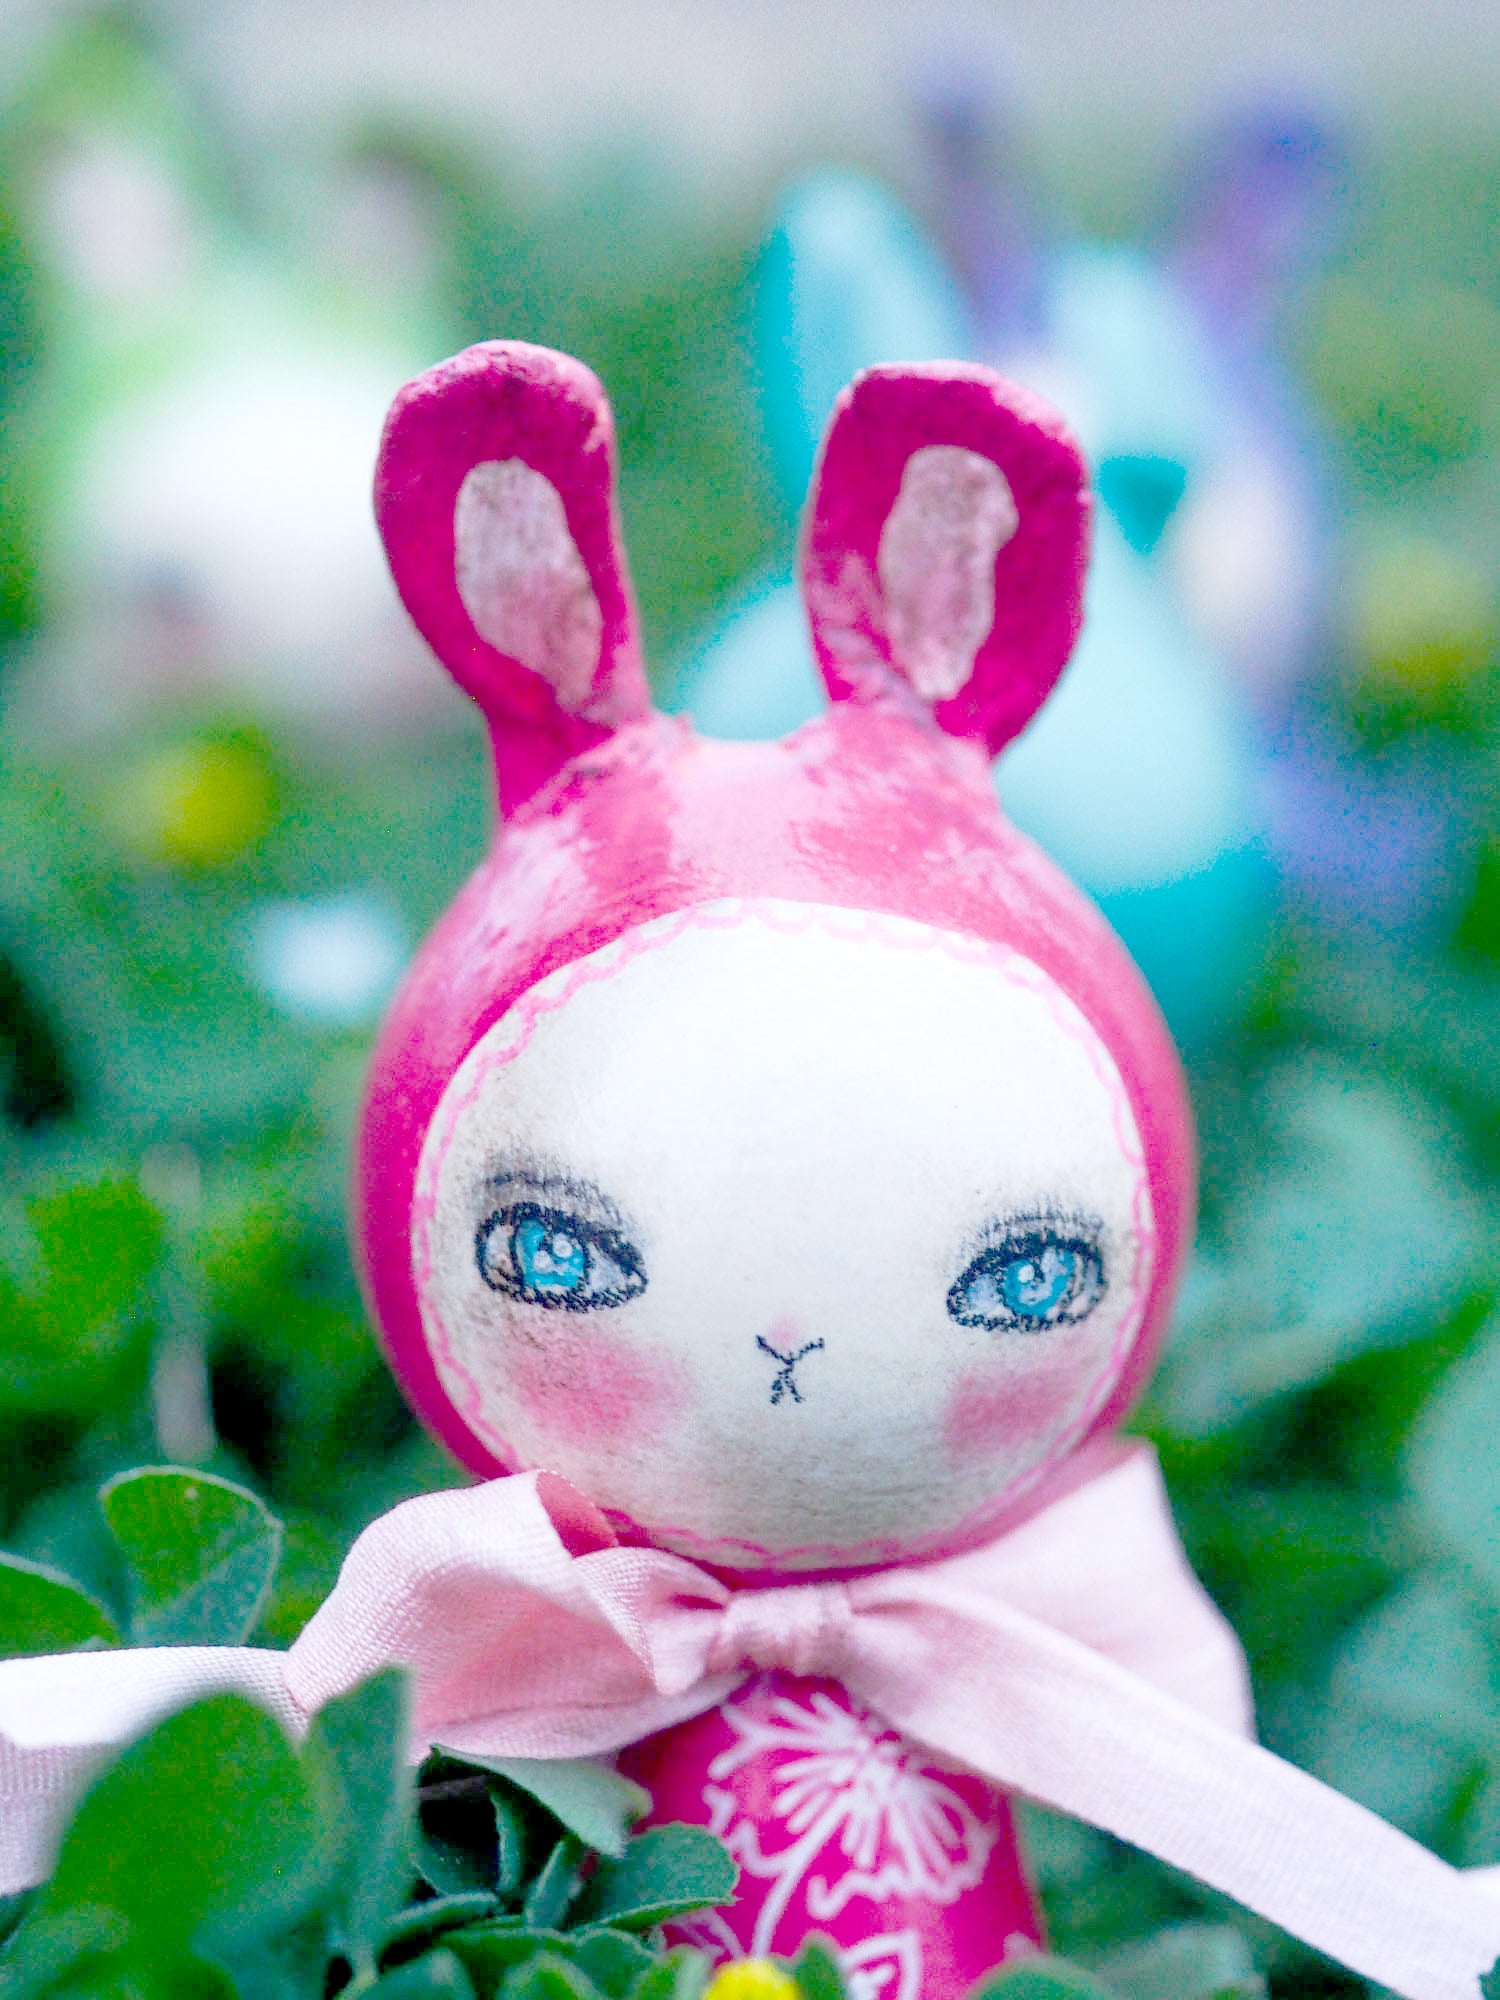 A kokeshi art doll handmade by Danita. Easter bunny rabbits with paper clay sculpted ears want to live with you this Spring time!